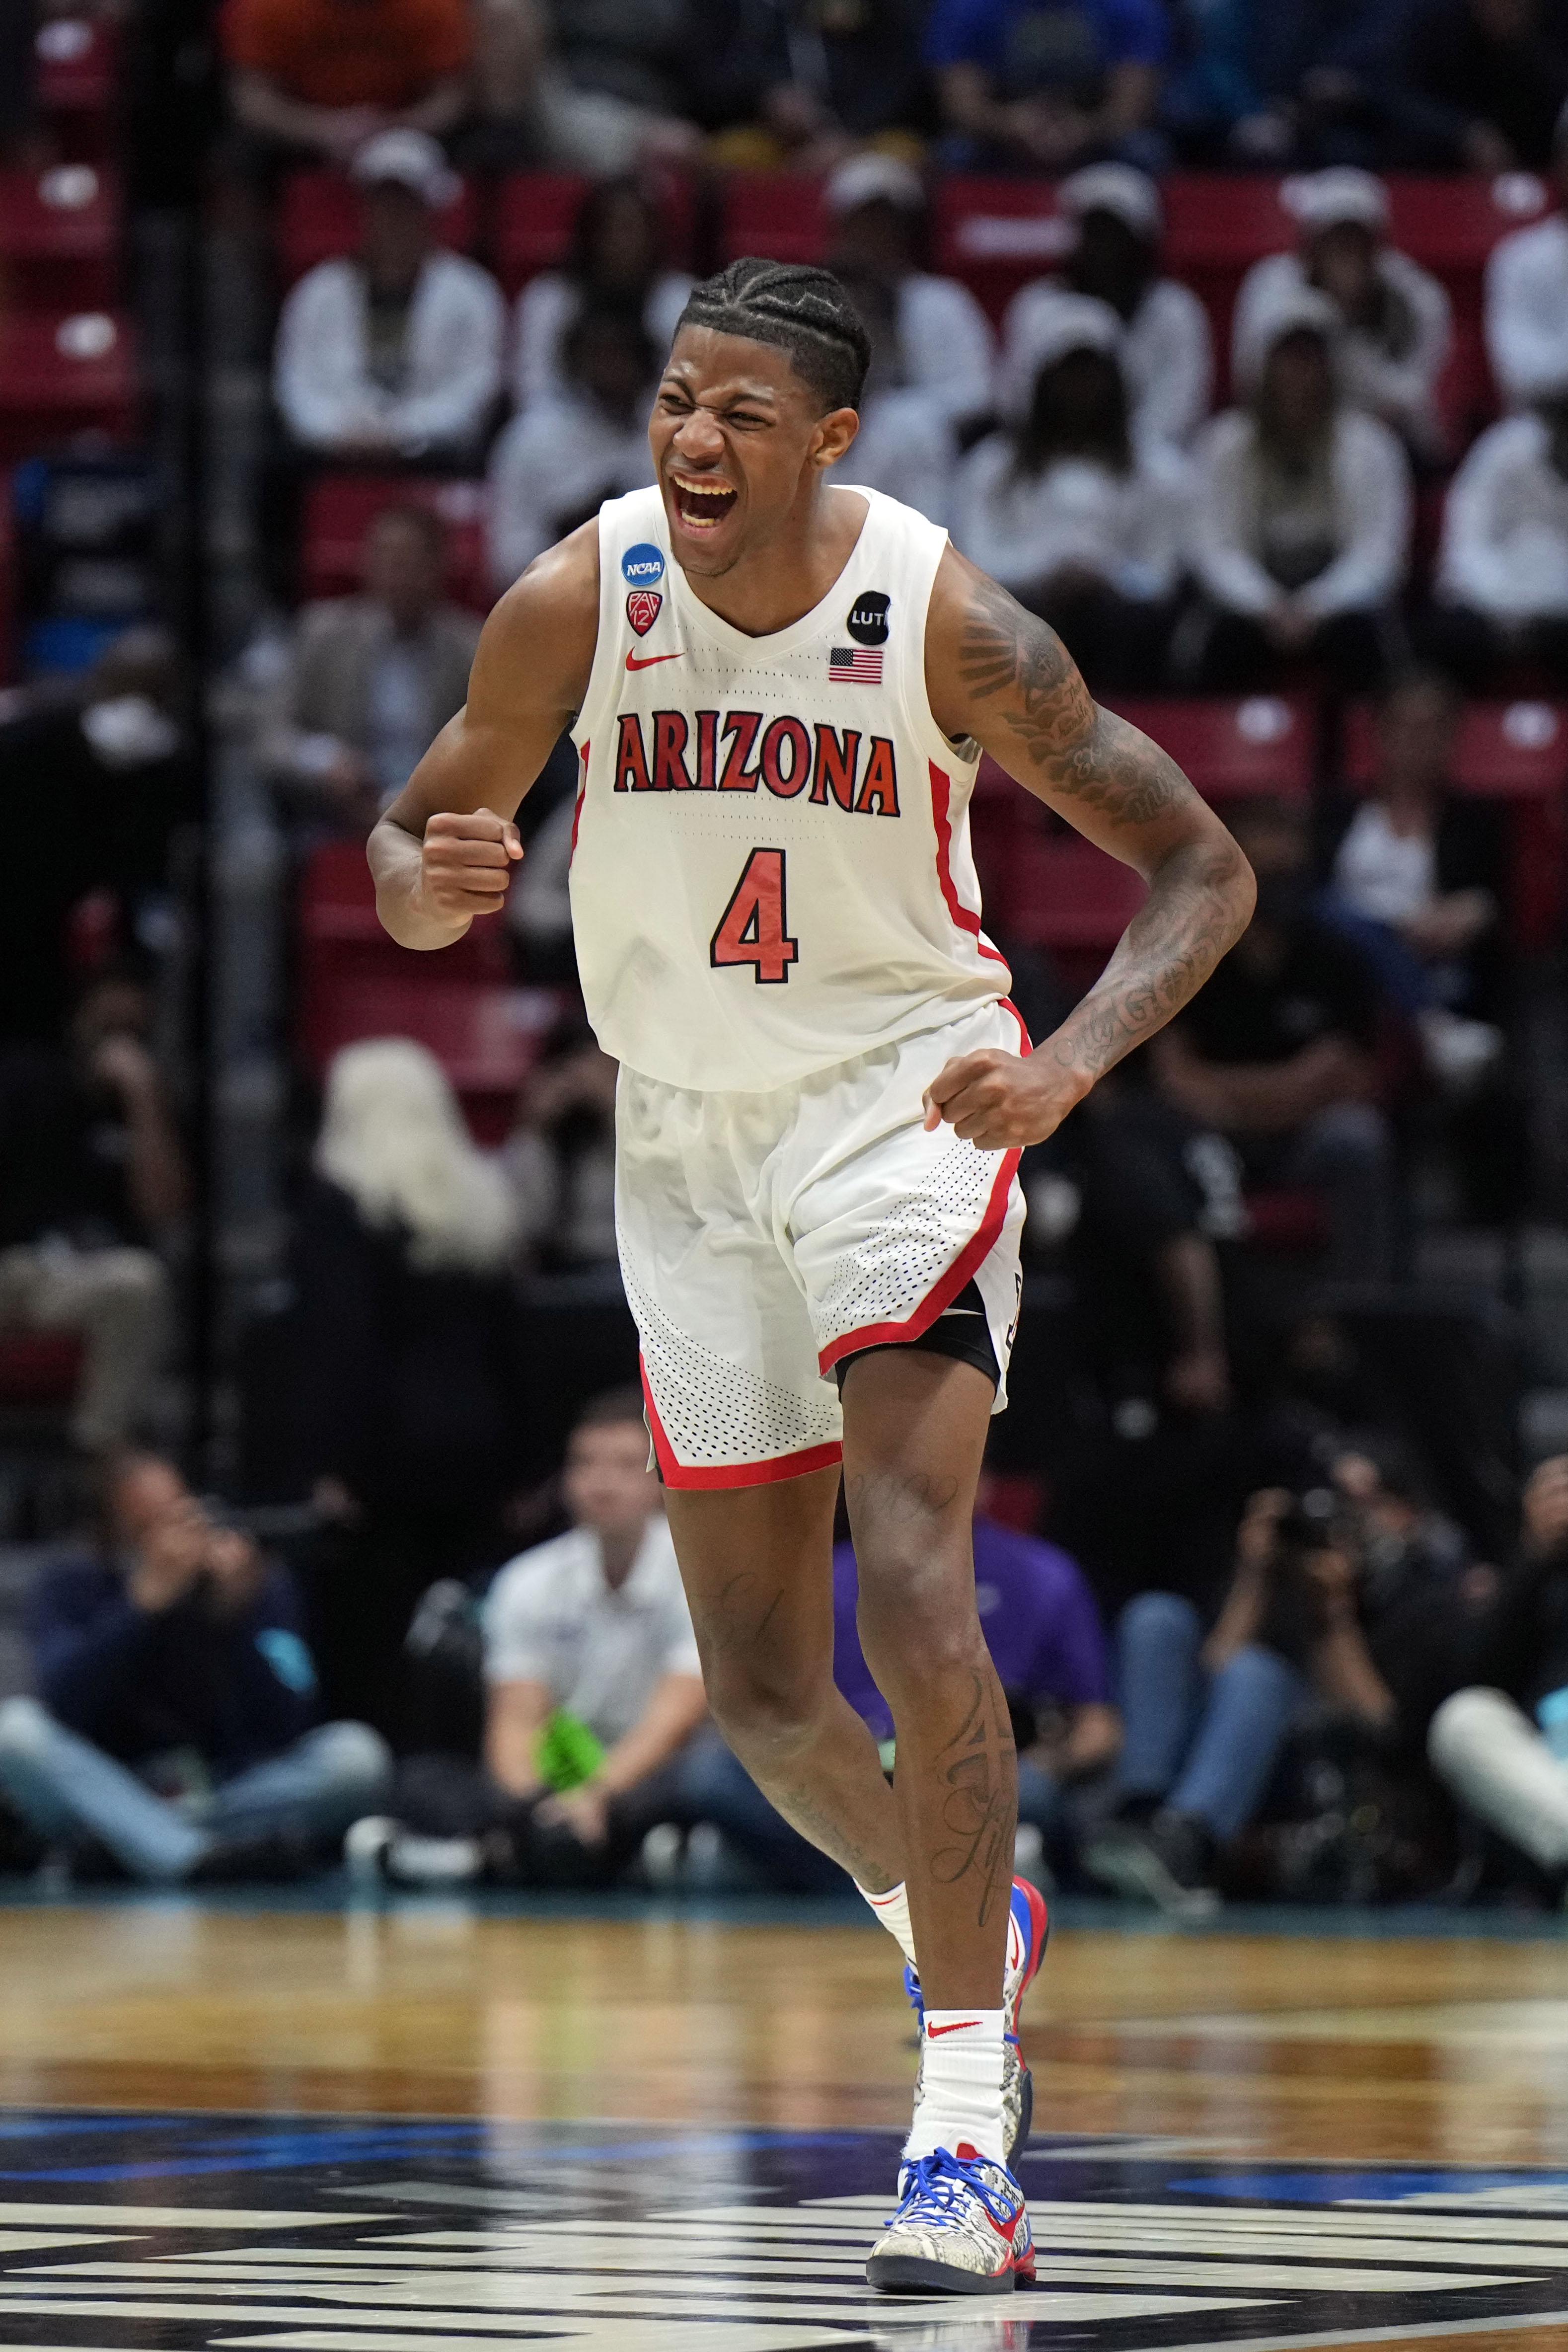 Arizona NCAA Tournament History: National Championships, All-Time Record, Best March Madness Results & More